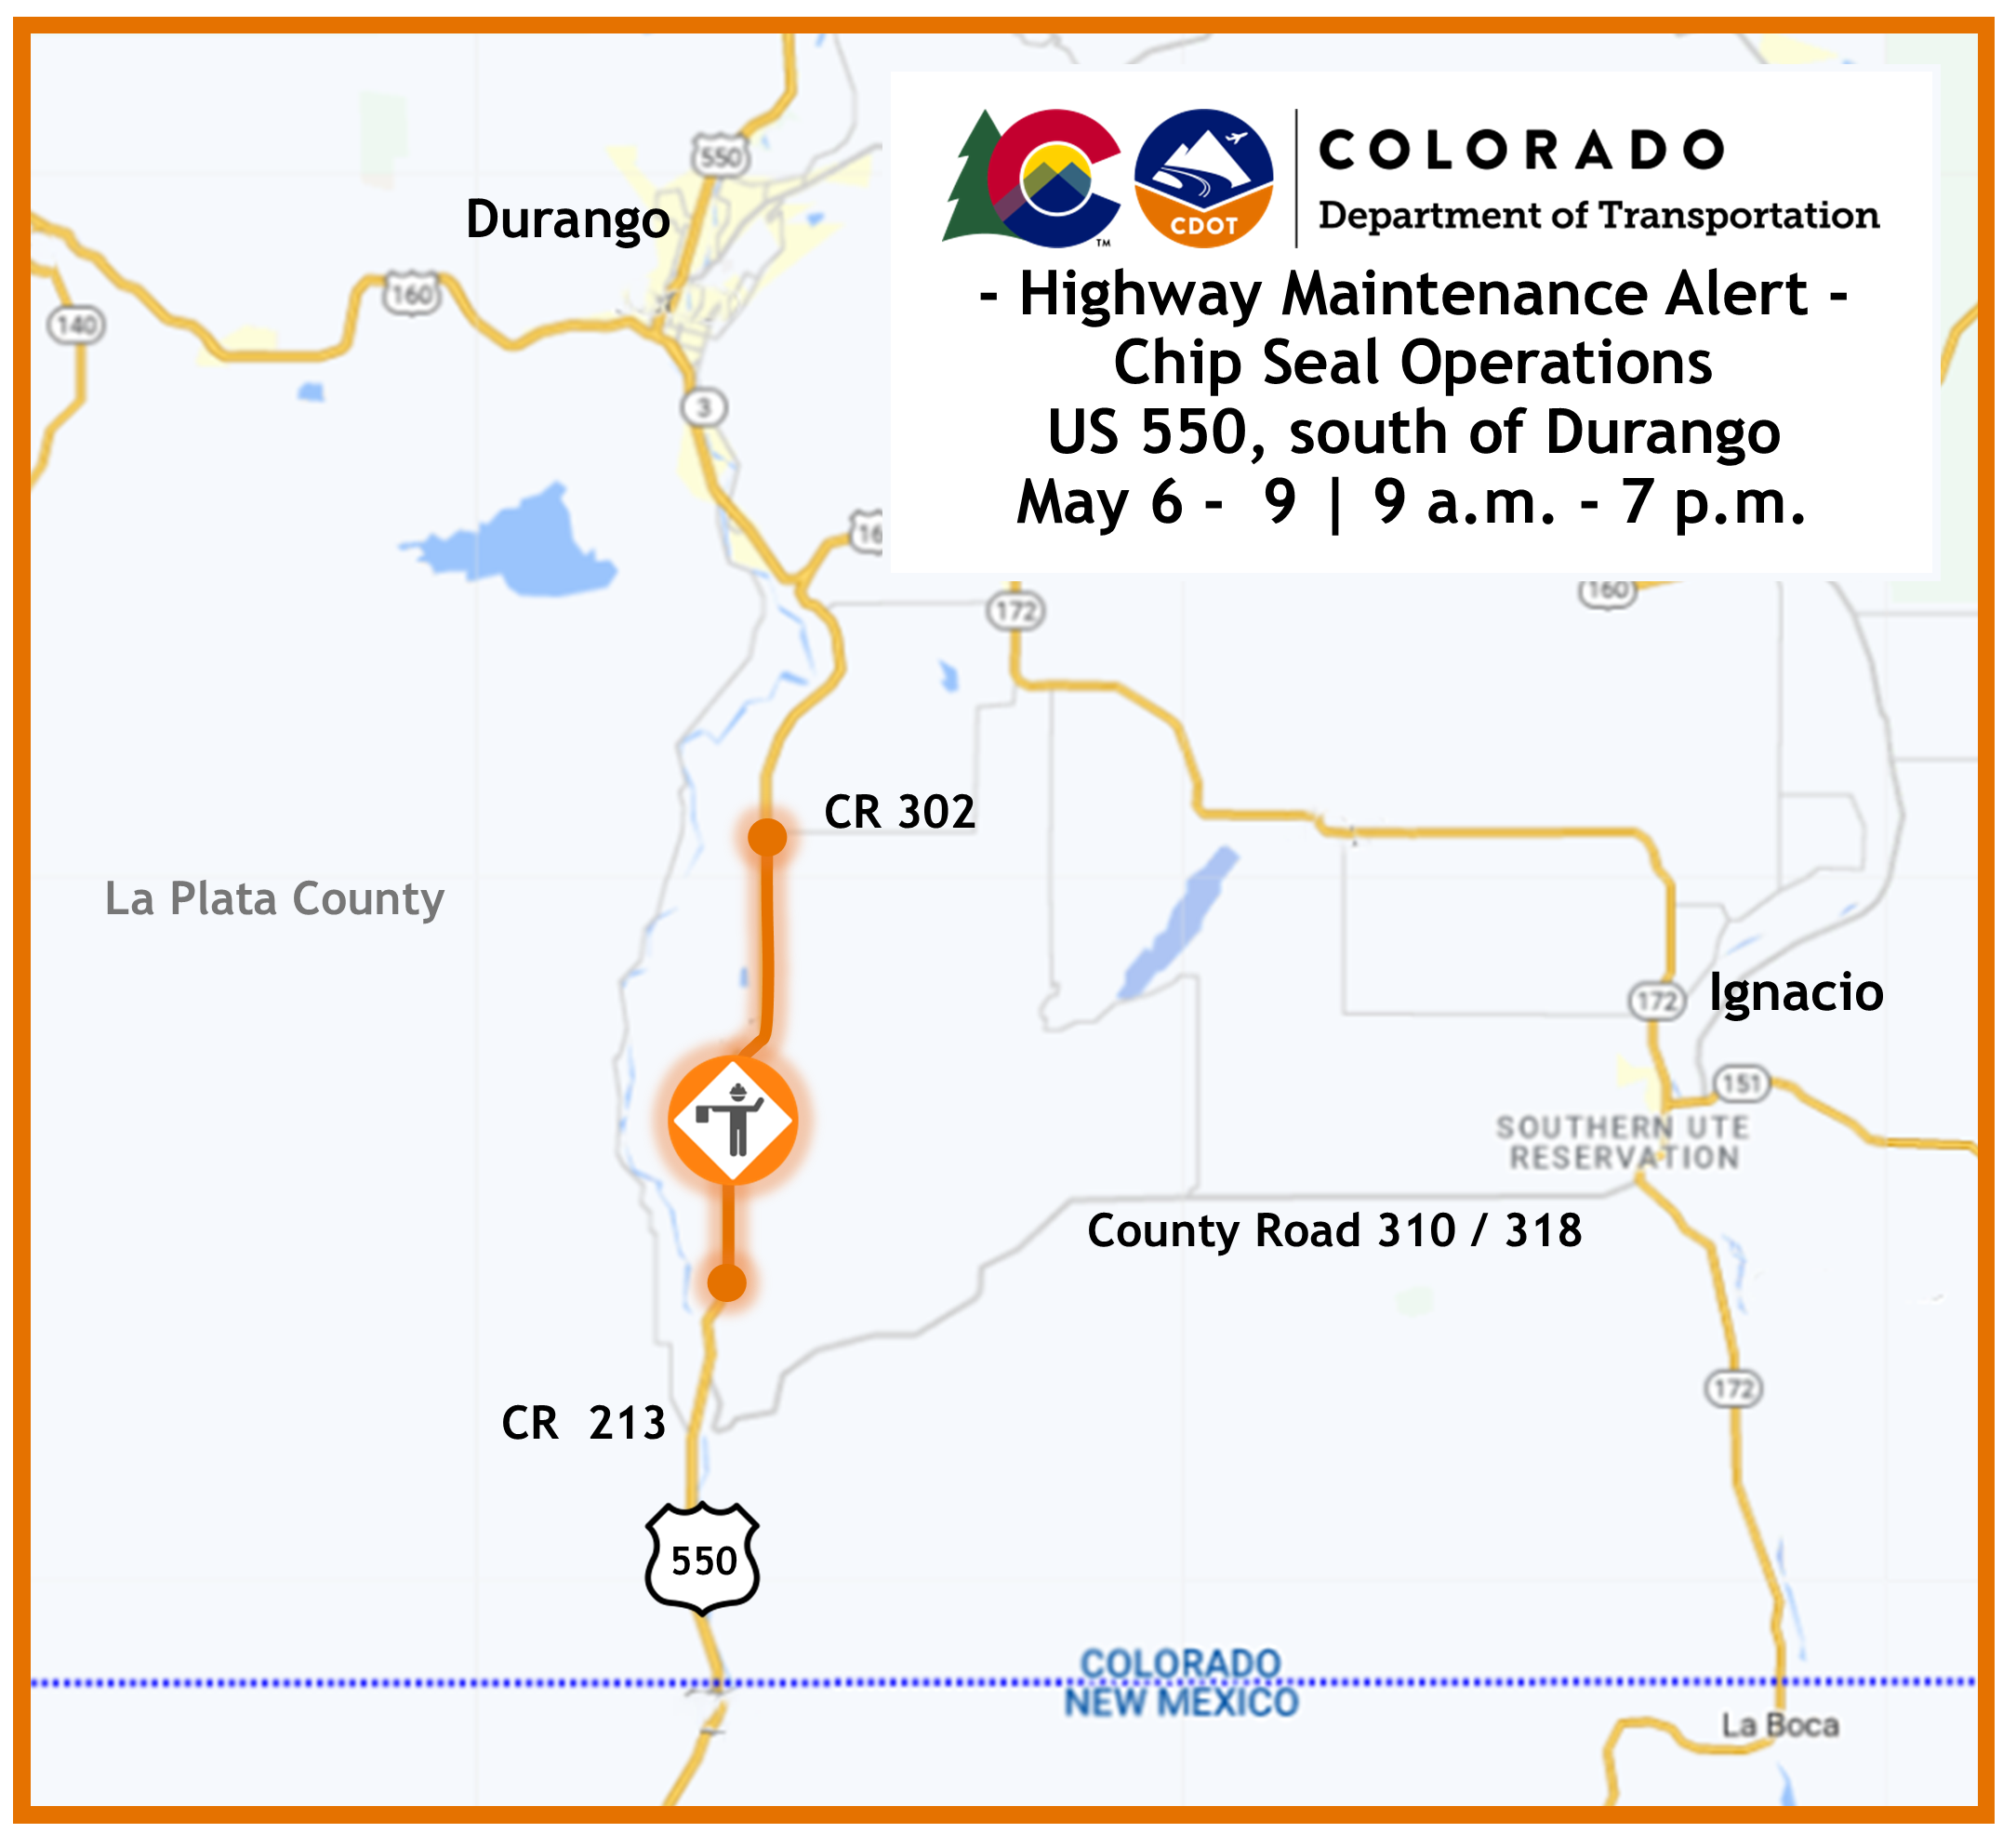 Alert_map_of_US550_chip_seal_operations_south_Durango.png detail image